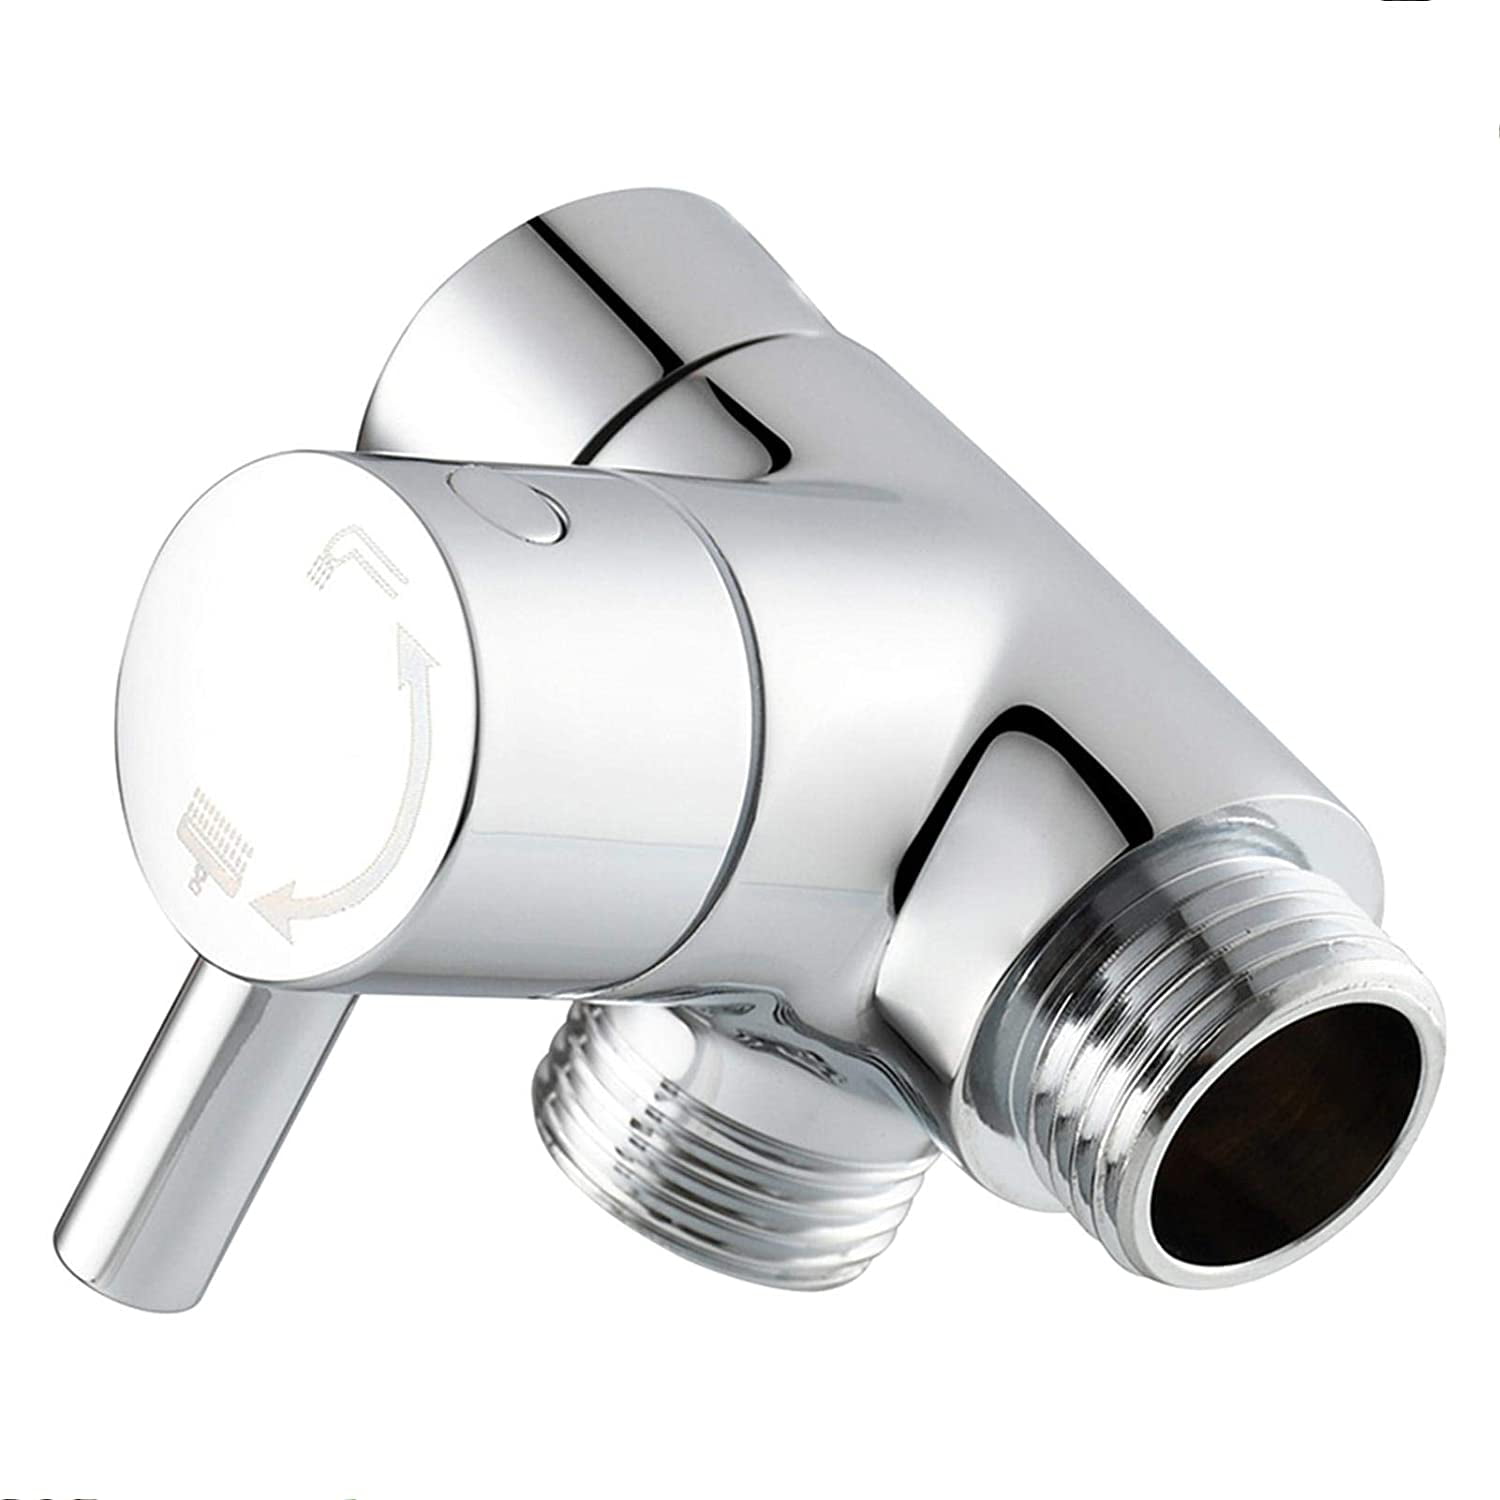 Double G1/2" Male Diverter Switch Shower Valve System Head Water Flow Control 